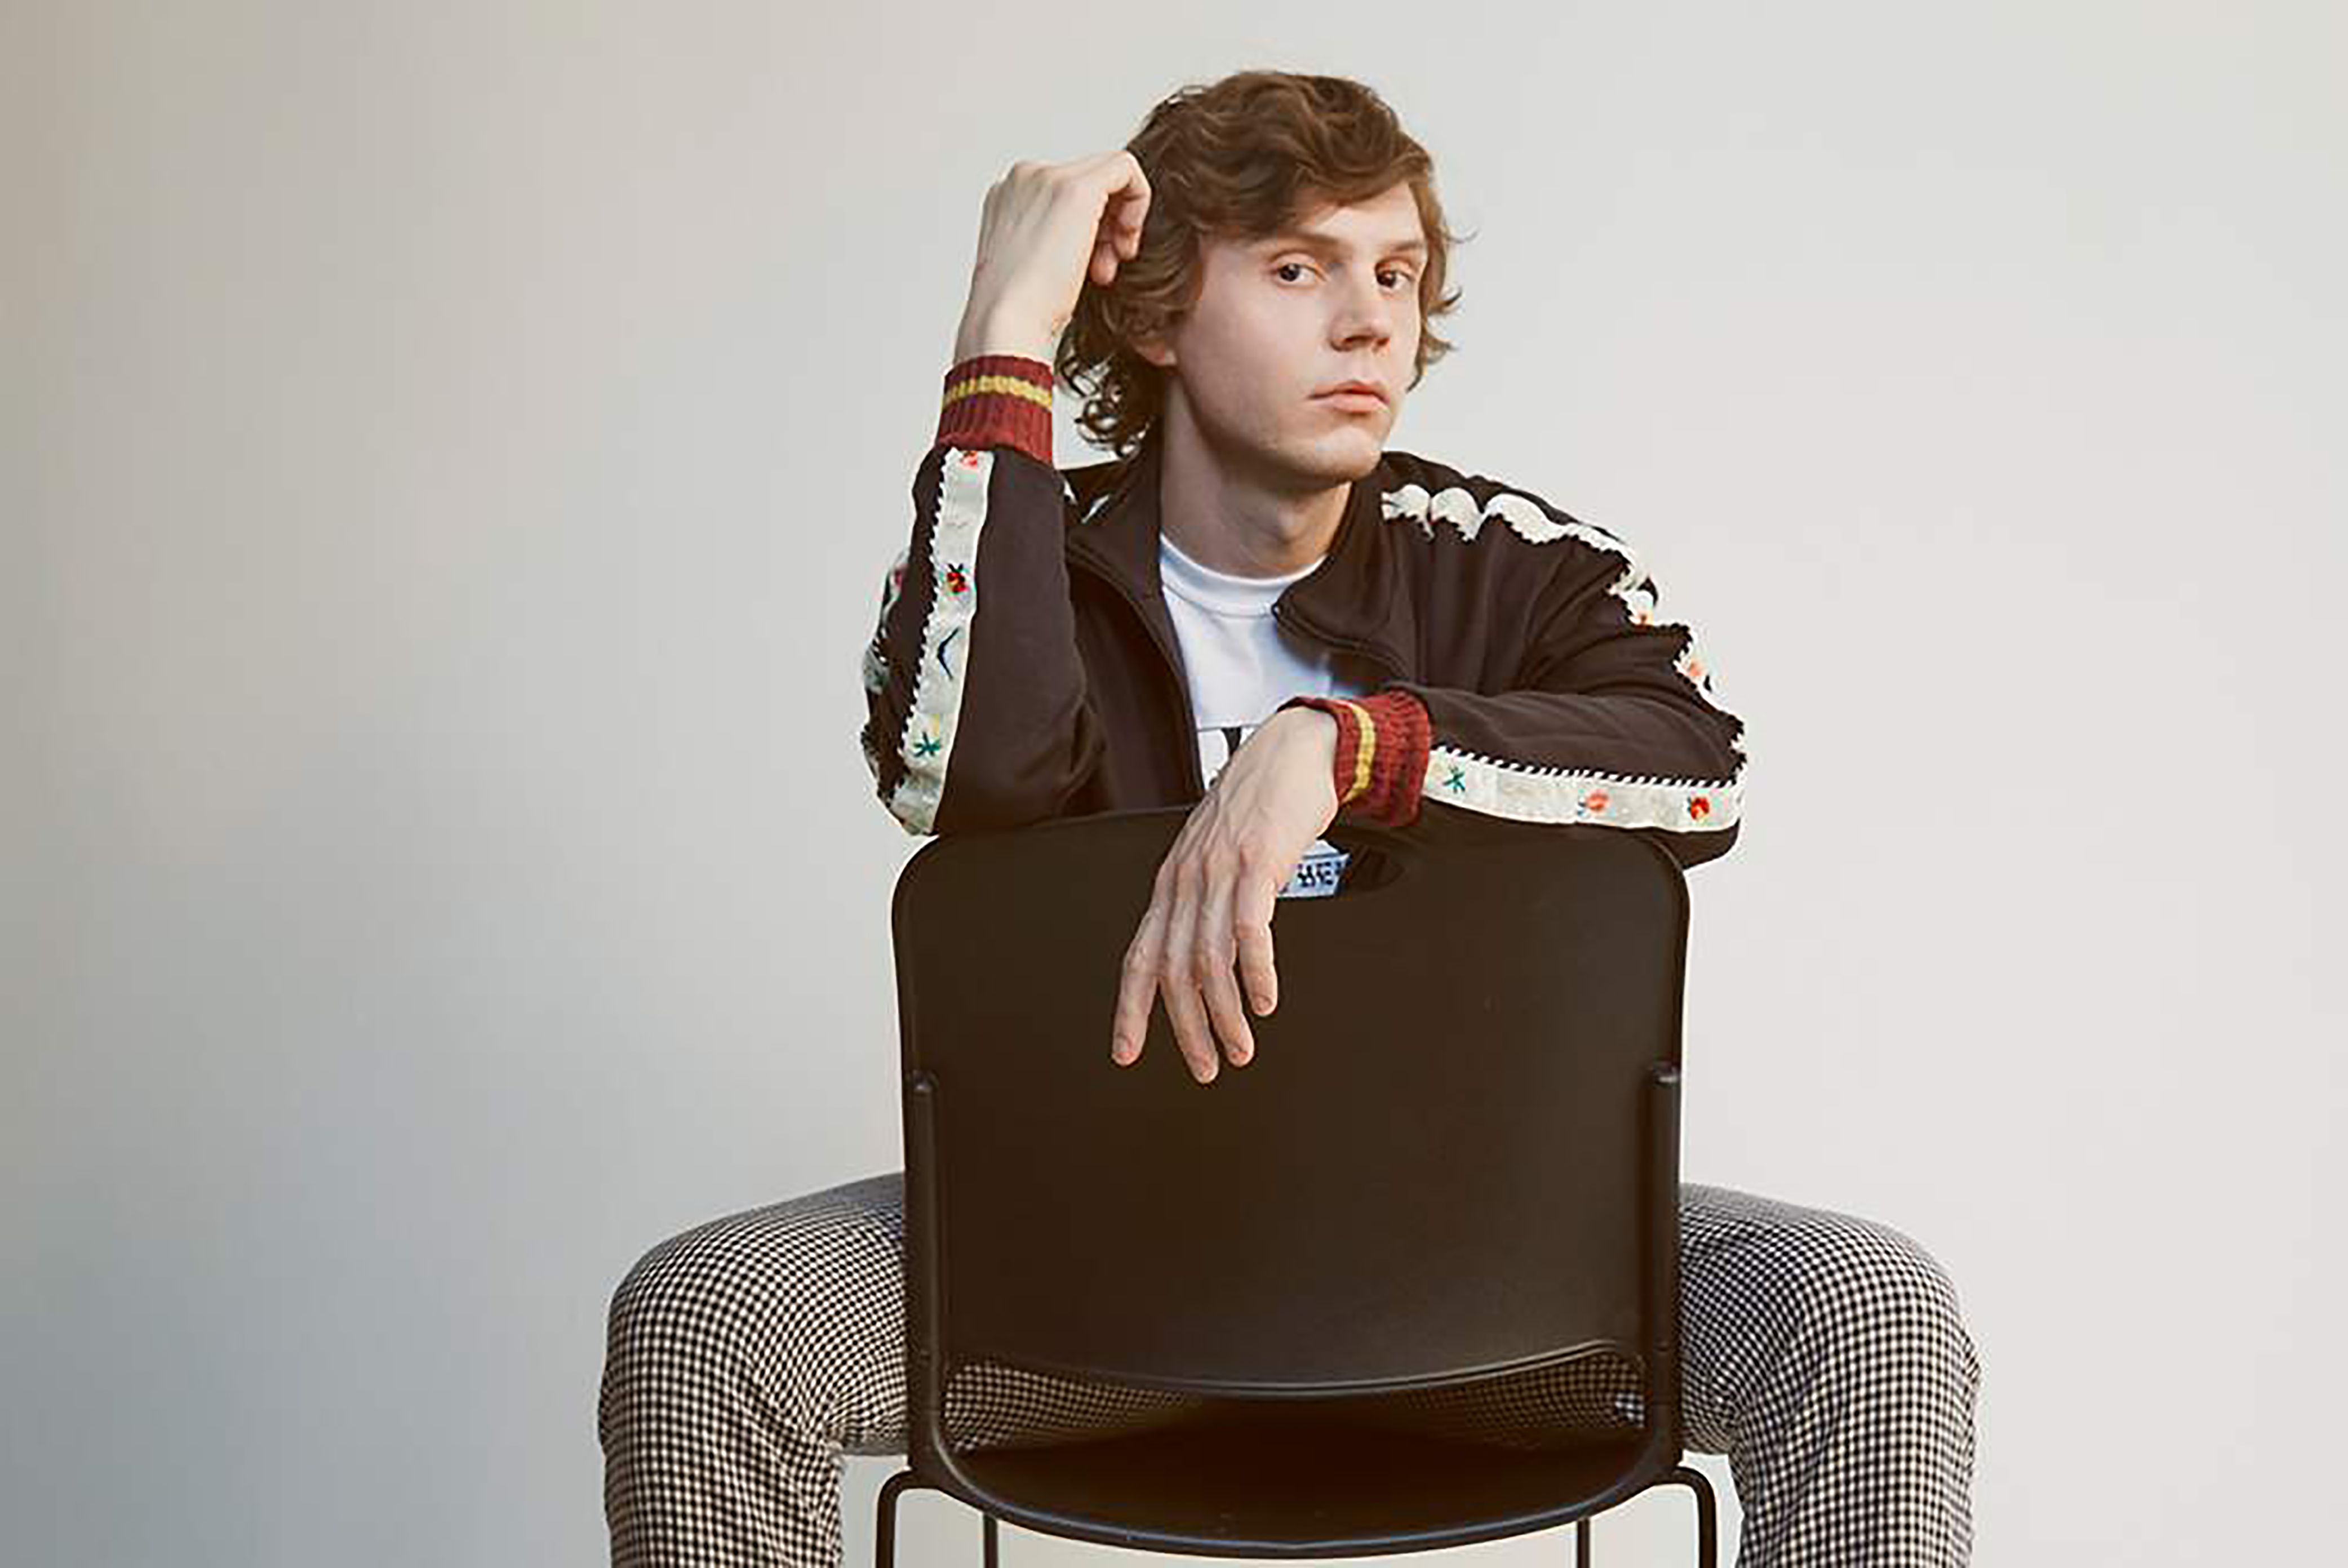 evan-peters-opens-up-about-his-role-in-pose-02.jpg